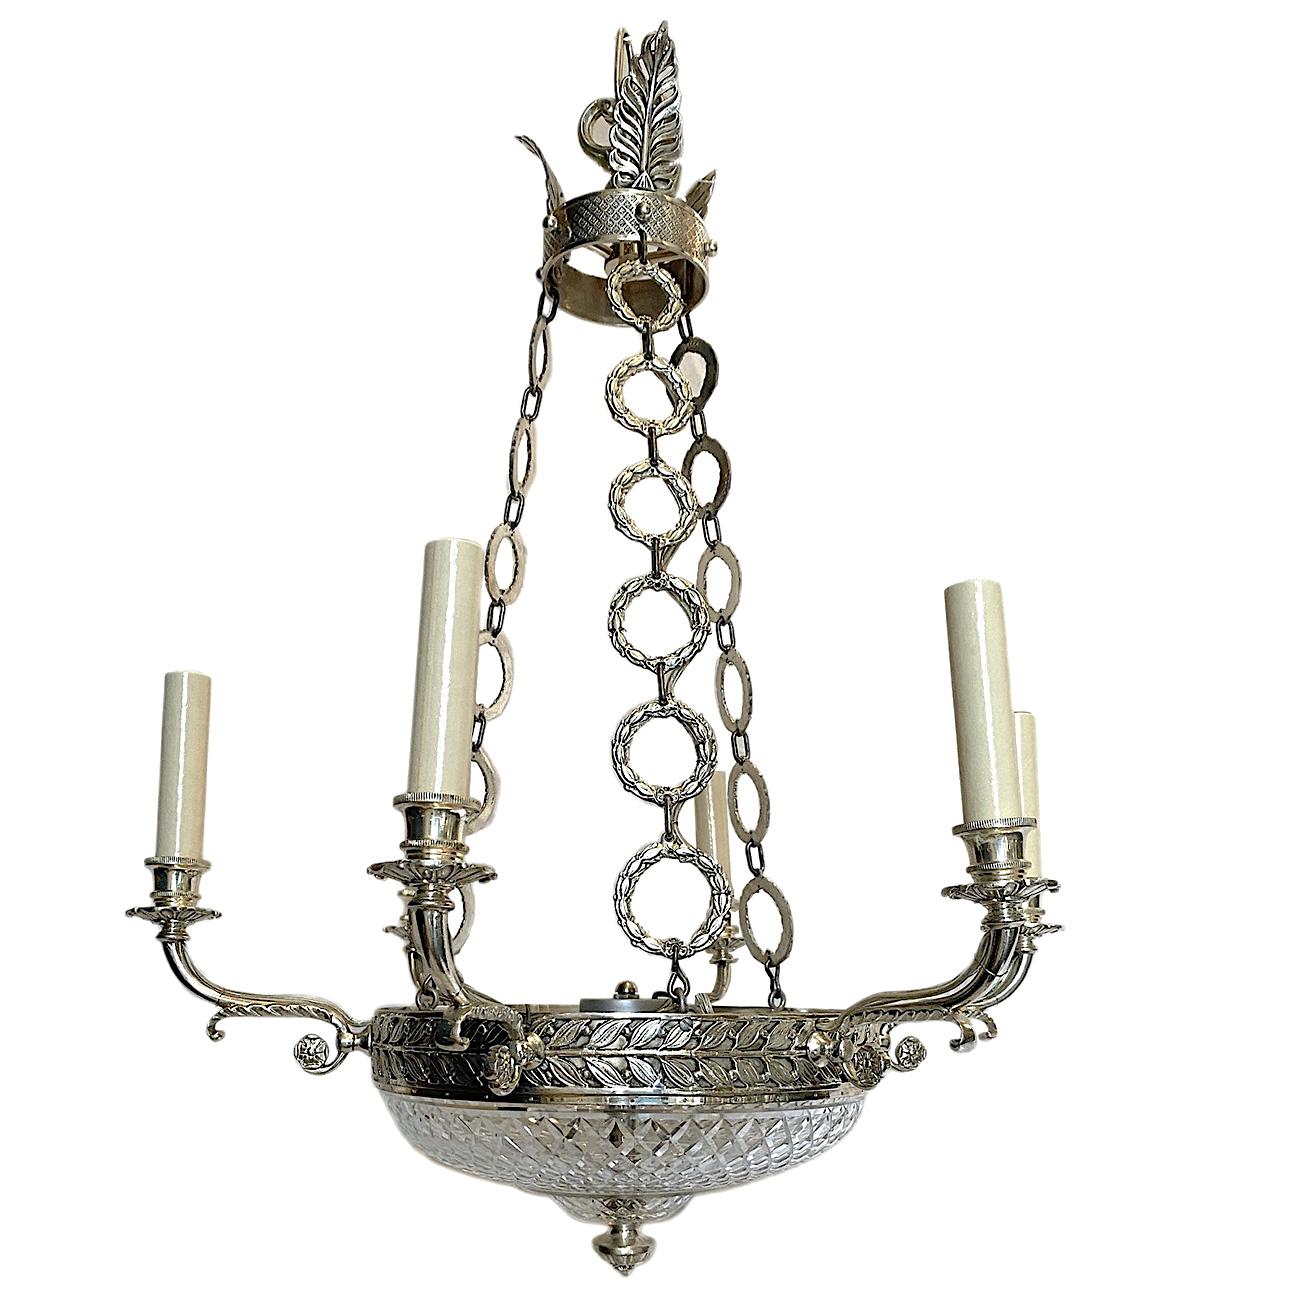 A circa 1920s French silver plated 6-arm chandelier with cut crystal inset and interior lights.

Measurements:
Current drop 27